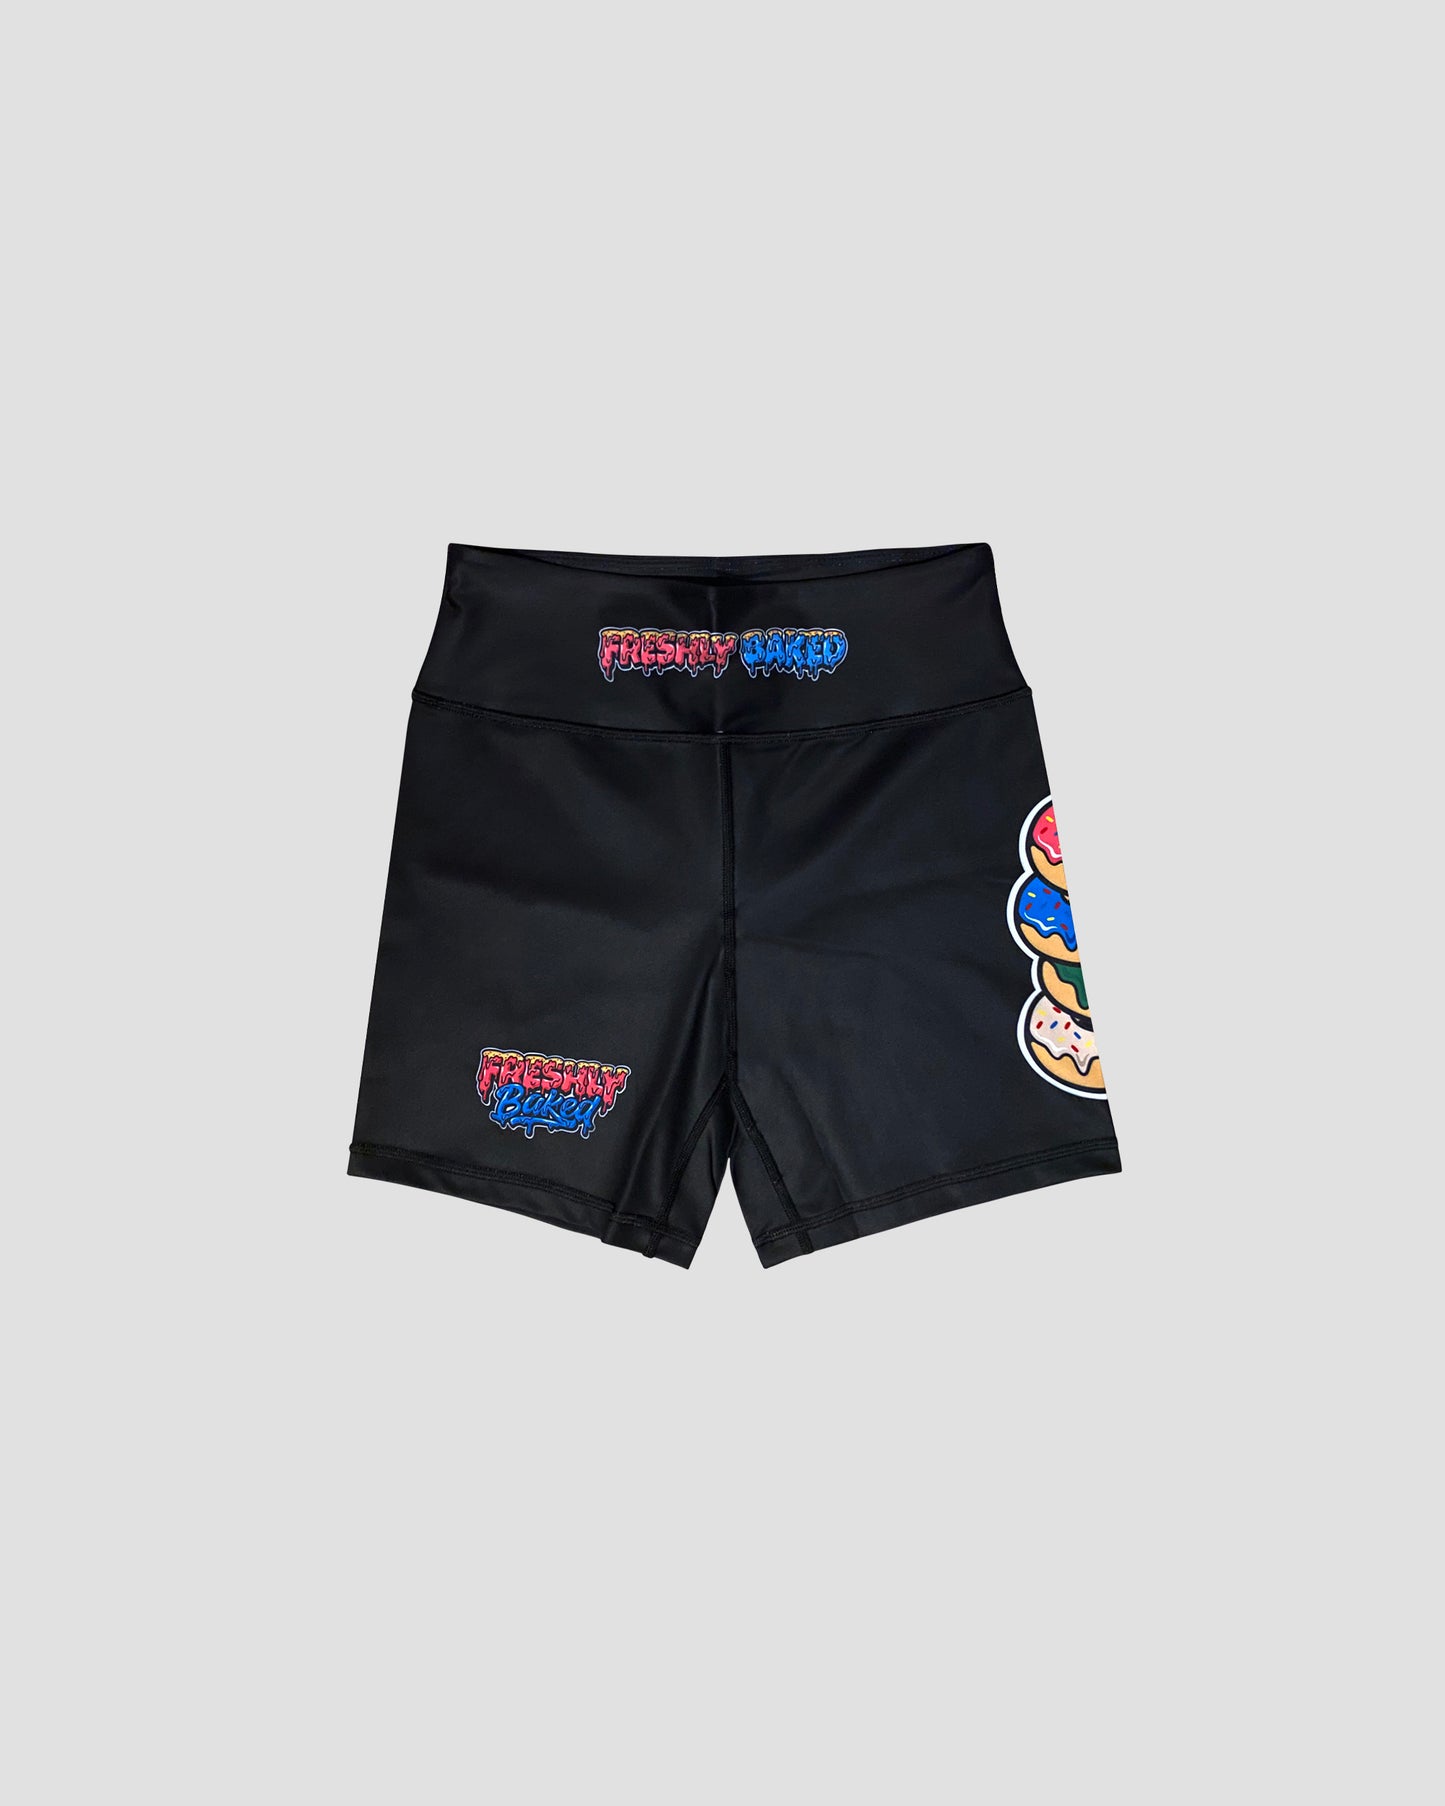 Freshly Baked Women's 5" Compression Shorts